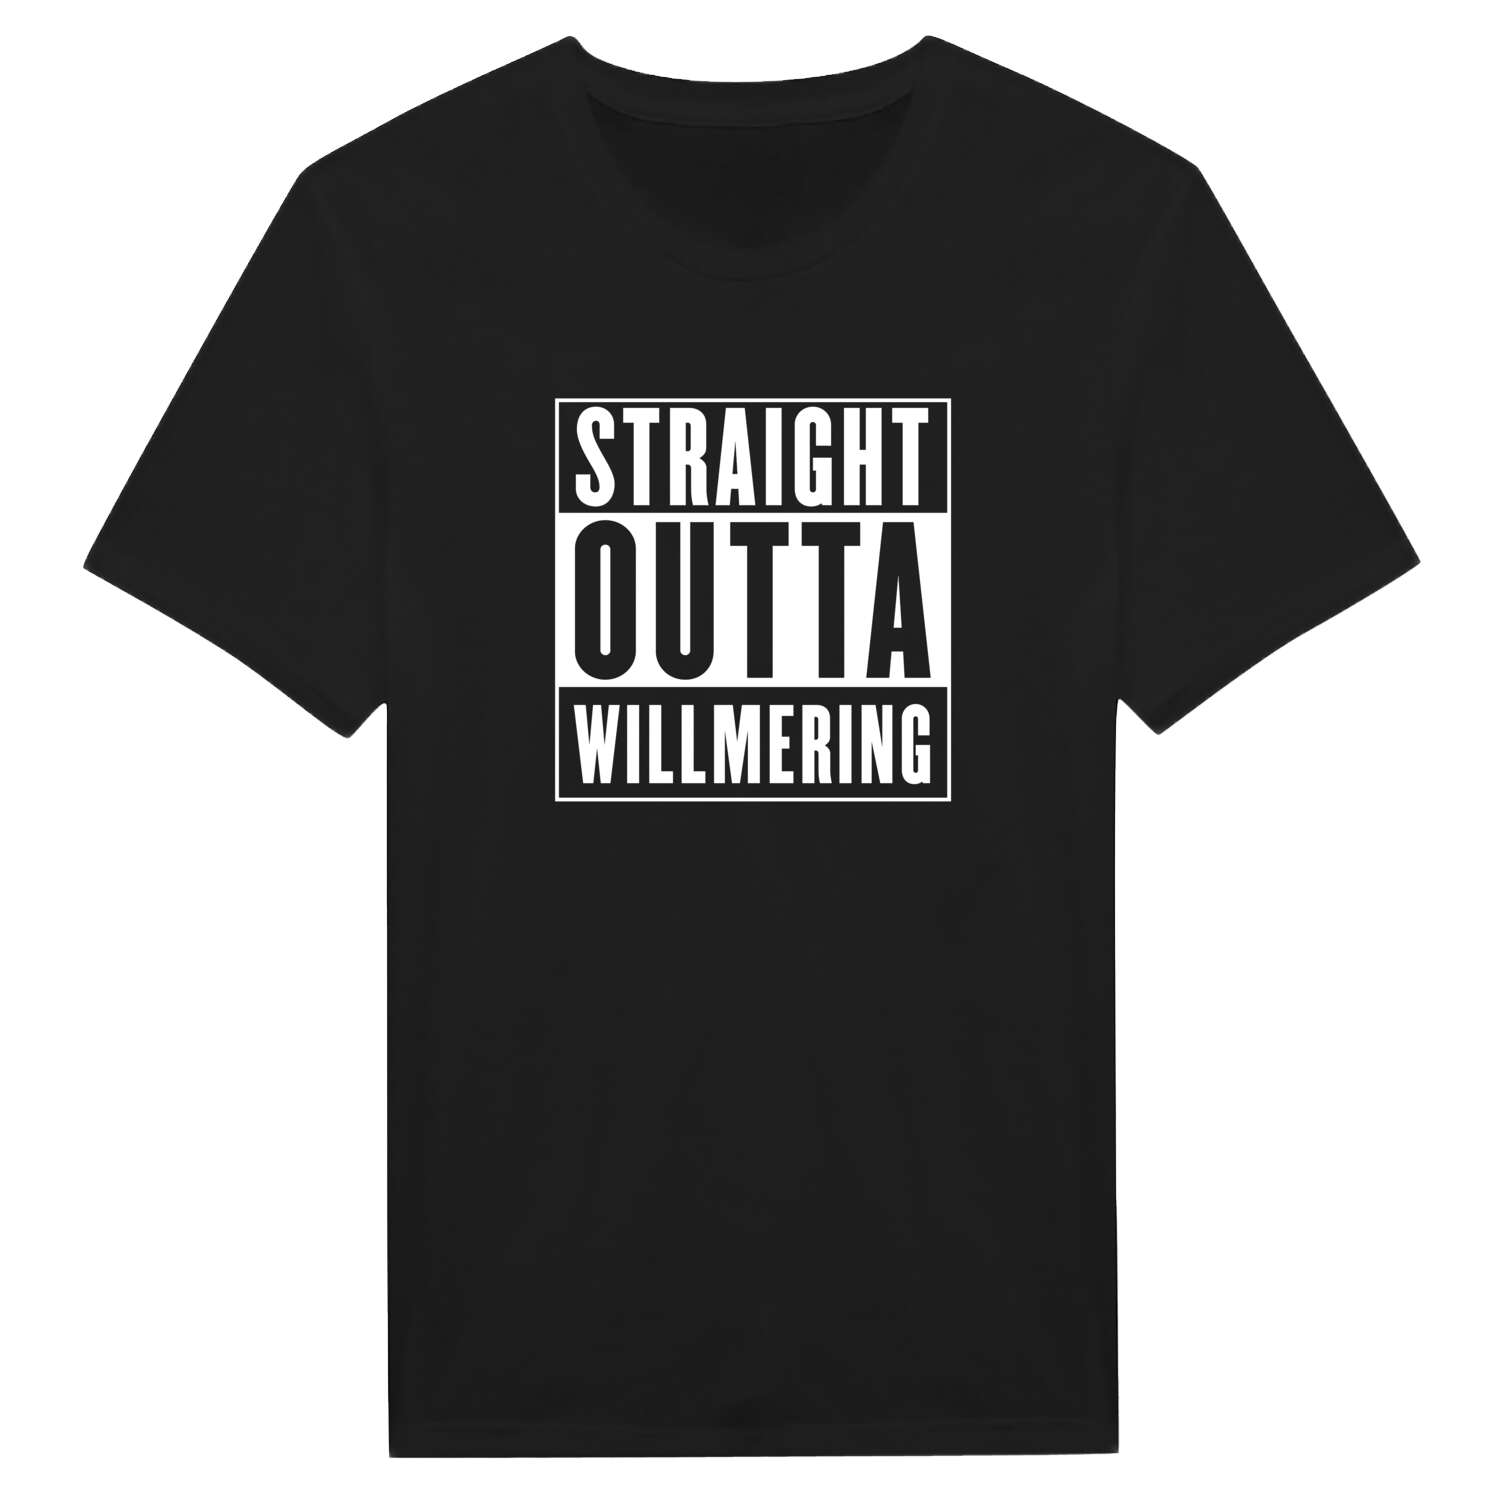 Willmering T-Shirt »Straight Outta«